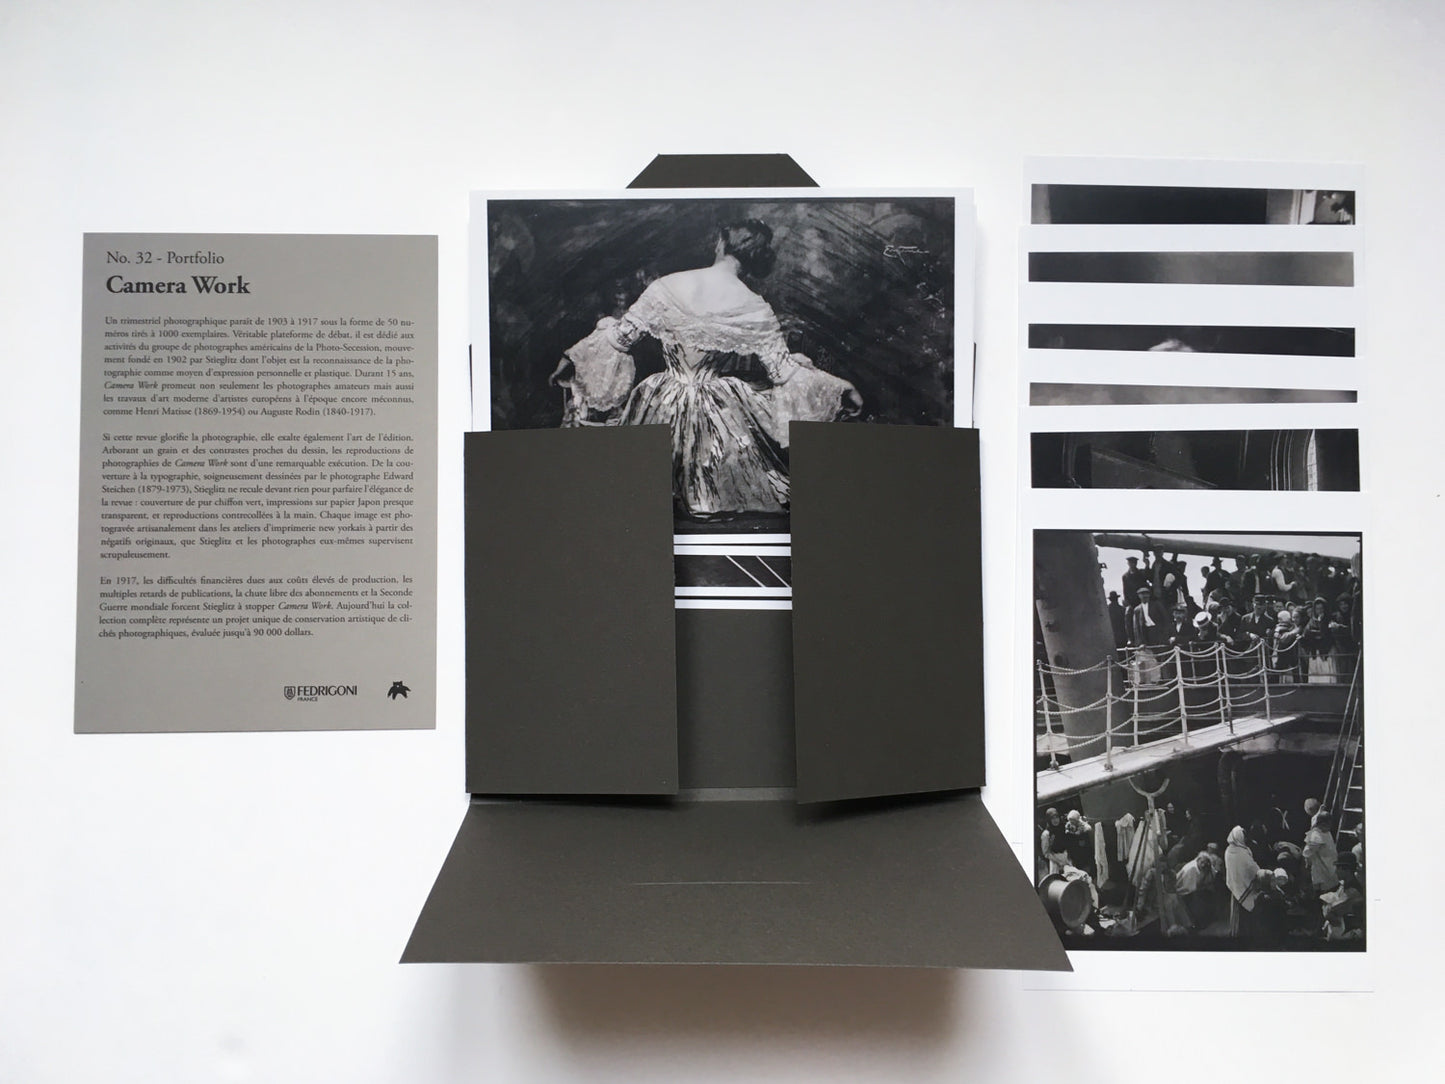 No. 32 - Wombat - The Photography and Art Box